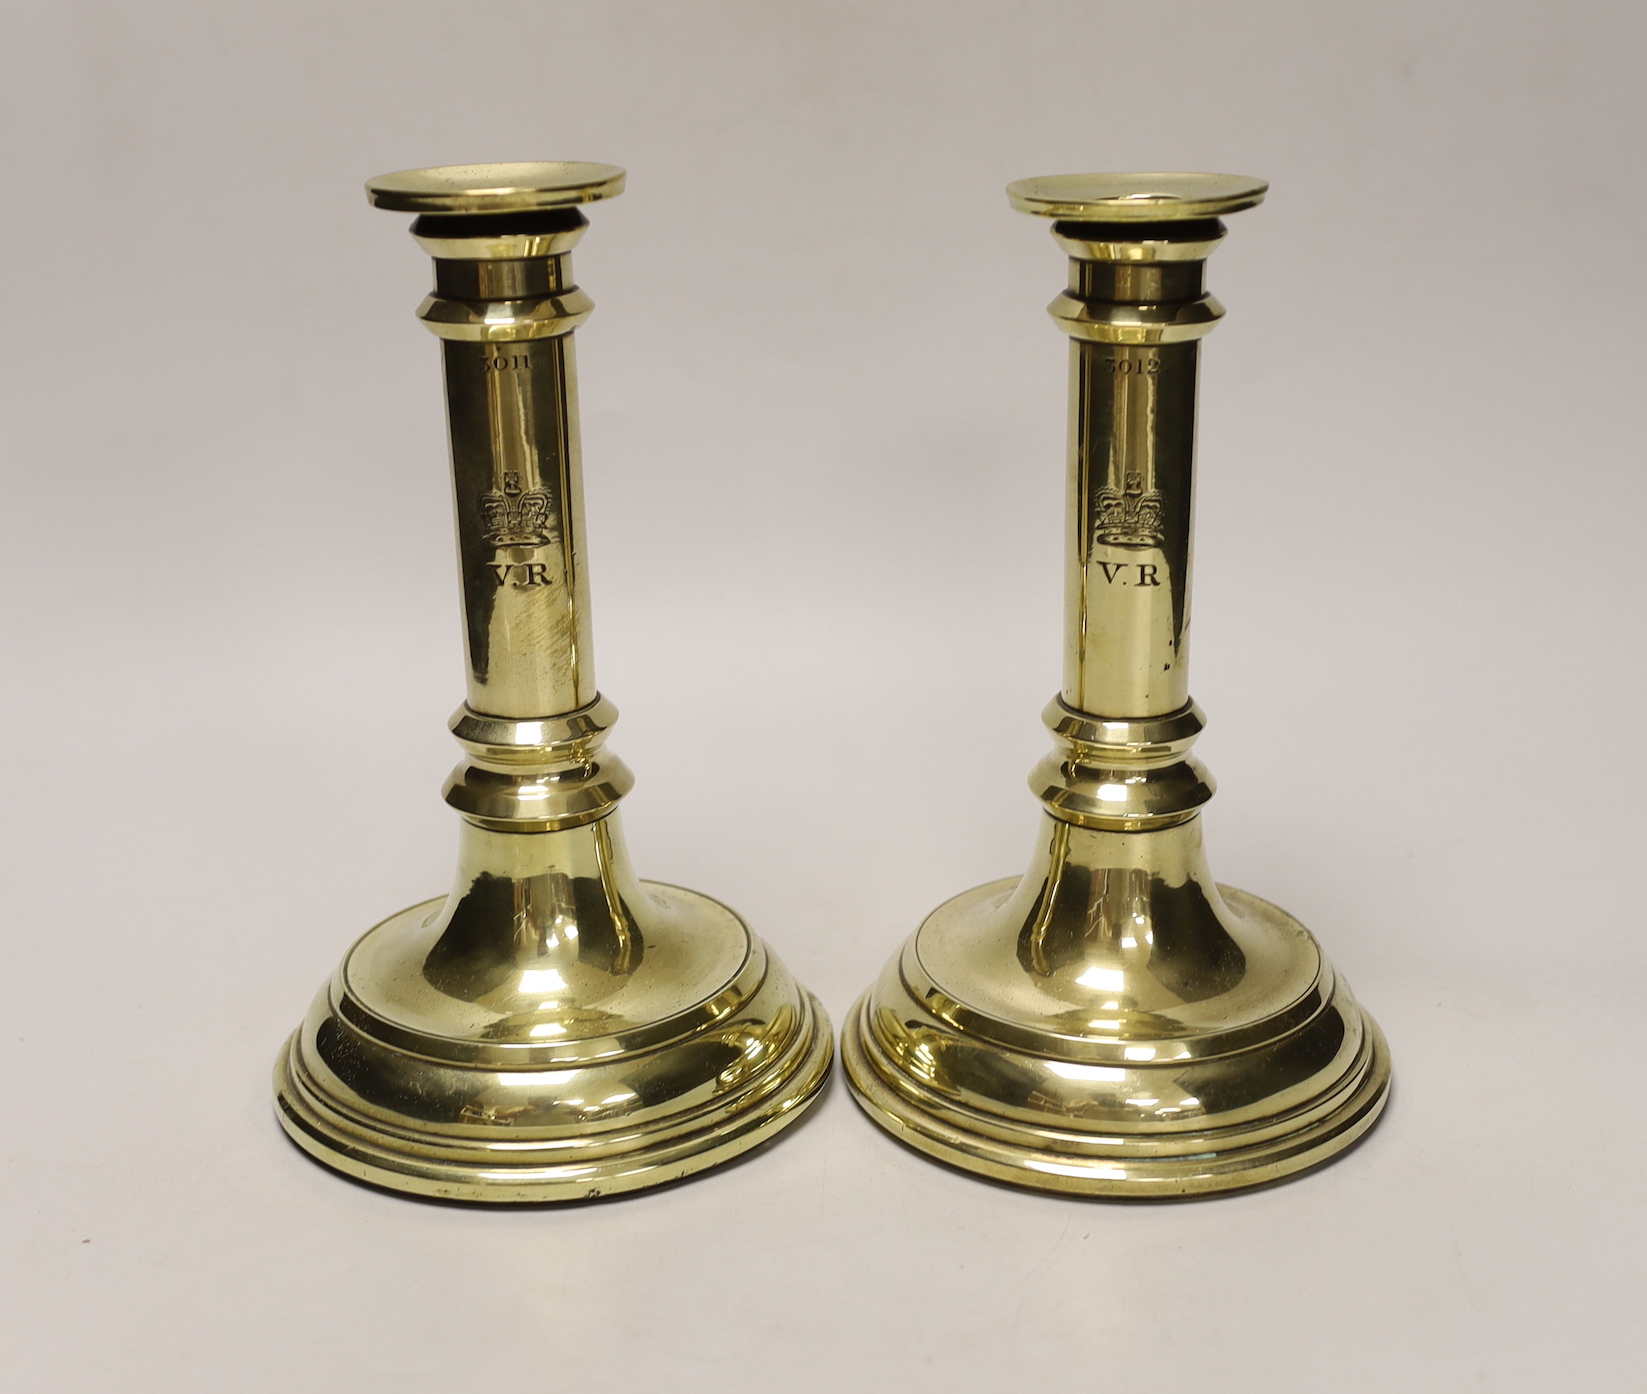 A pair of Victorian brass candlesticks possibly from House of Commons or military consecutively numbered, 21.5cm tall